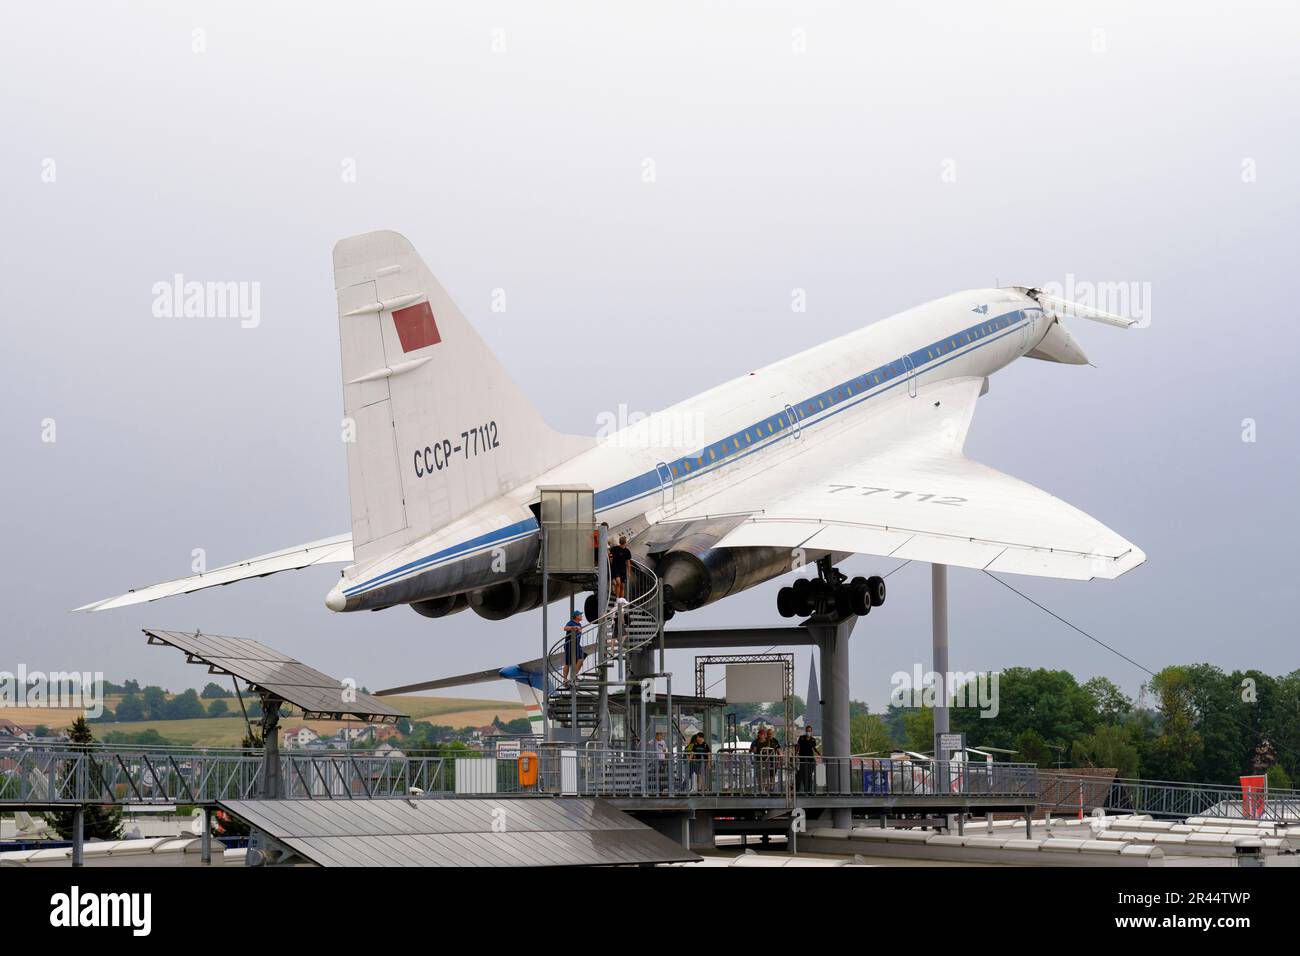 Germany, Baden-Wurttemberg: the Technik Museum Sinsheim, technology museum. Tupolev Tu-144 supersonic passenger airliner belonging to the Russian airl Stock Photo